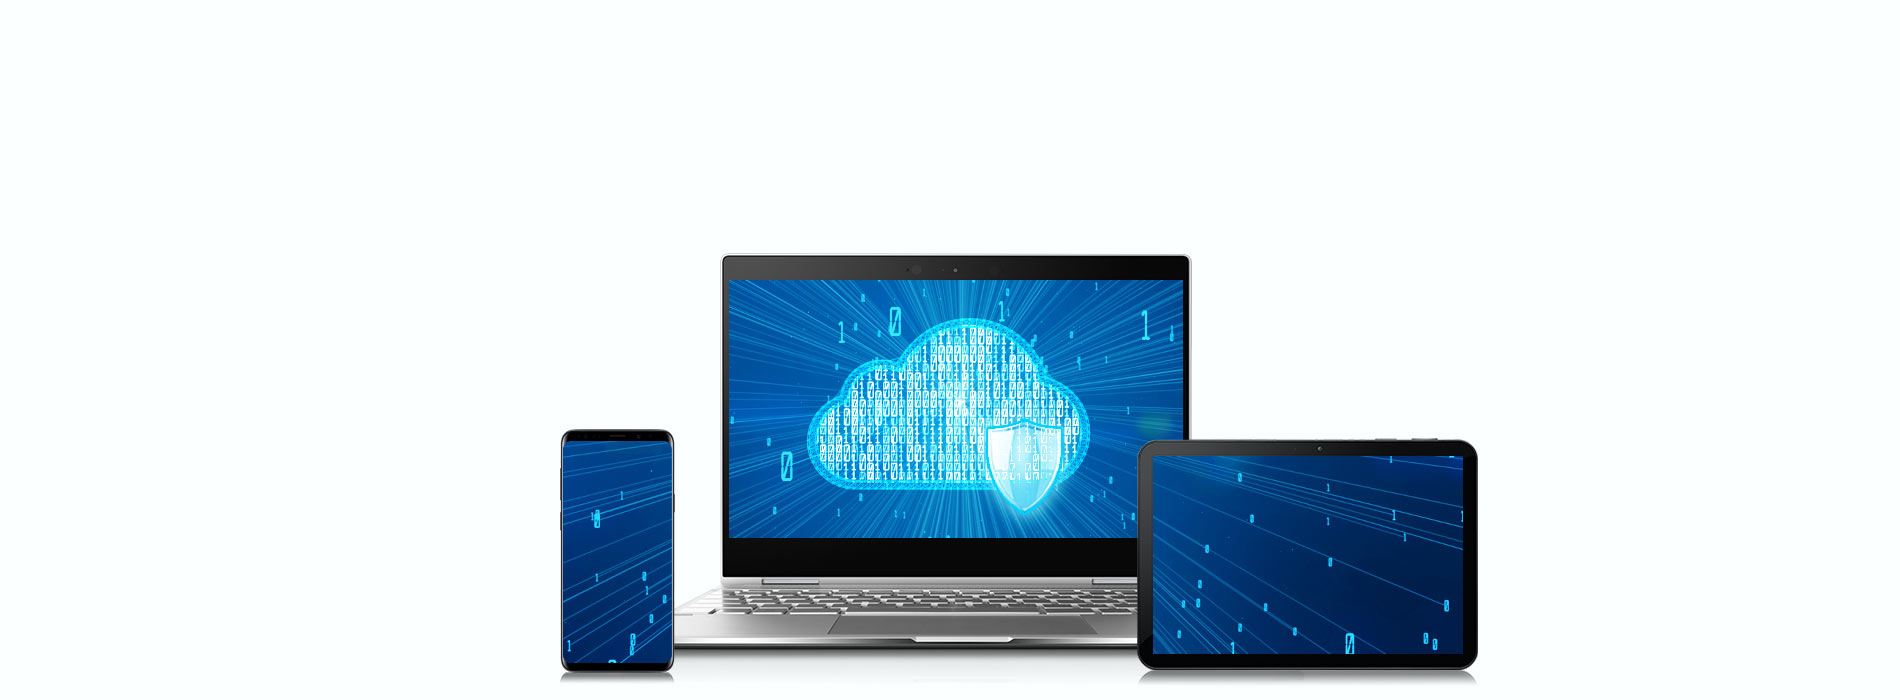 Cloud security solutions